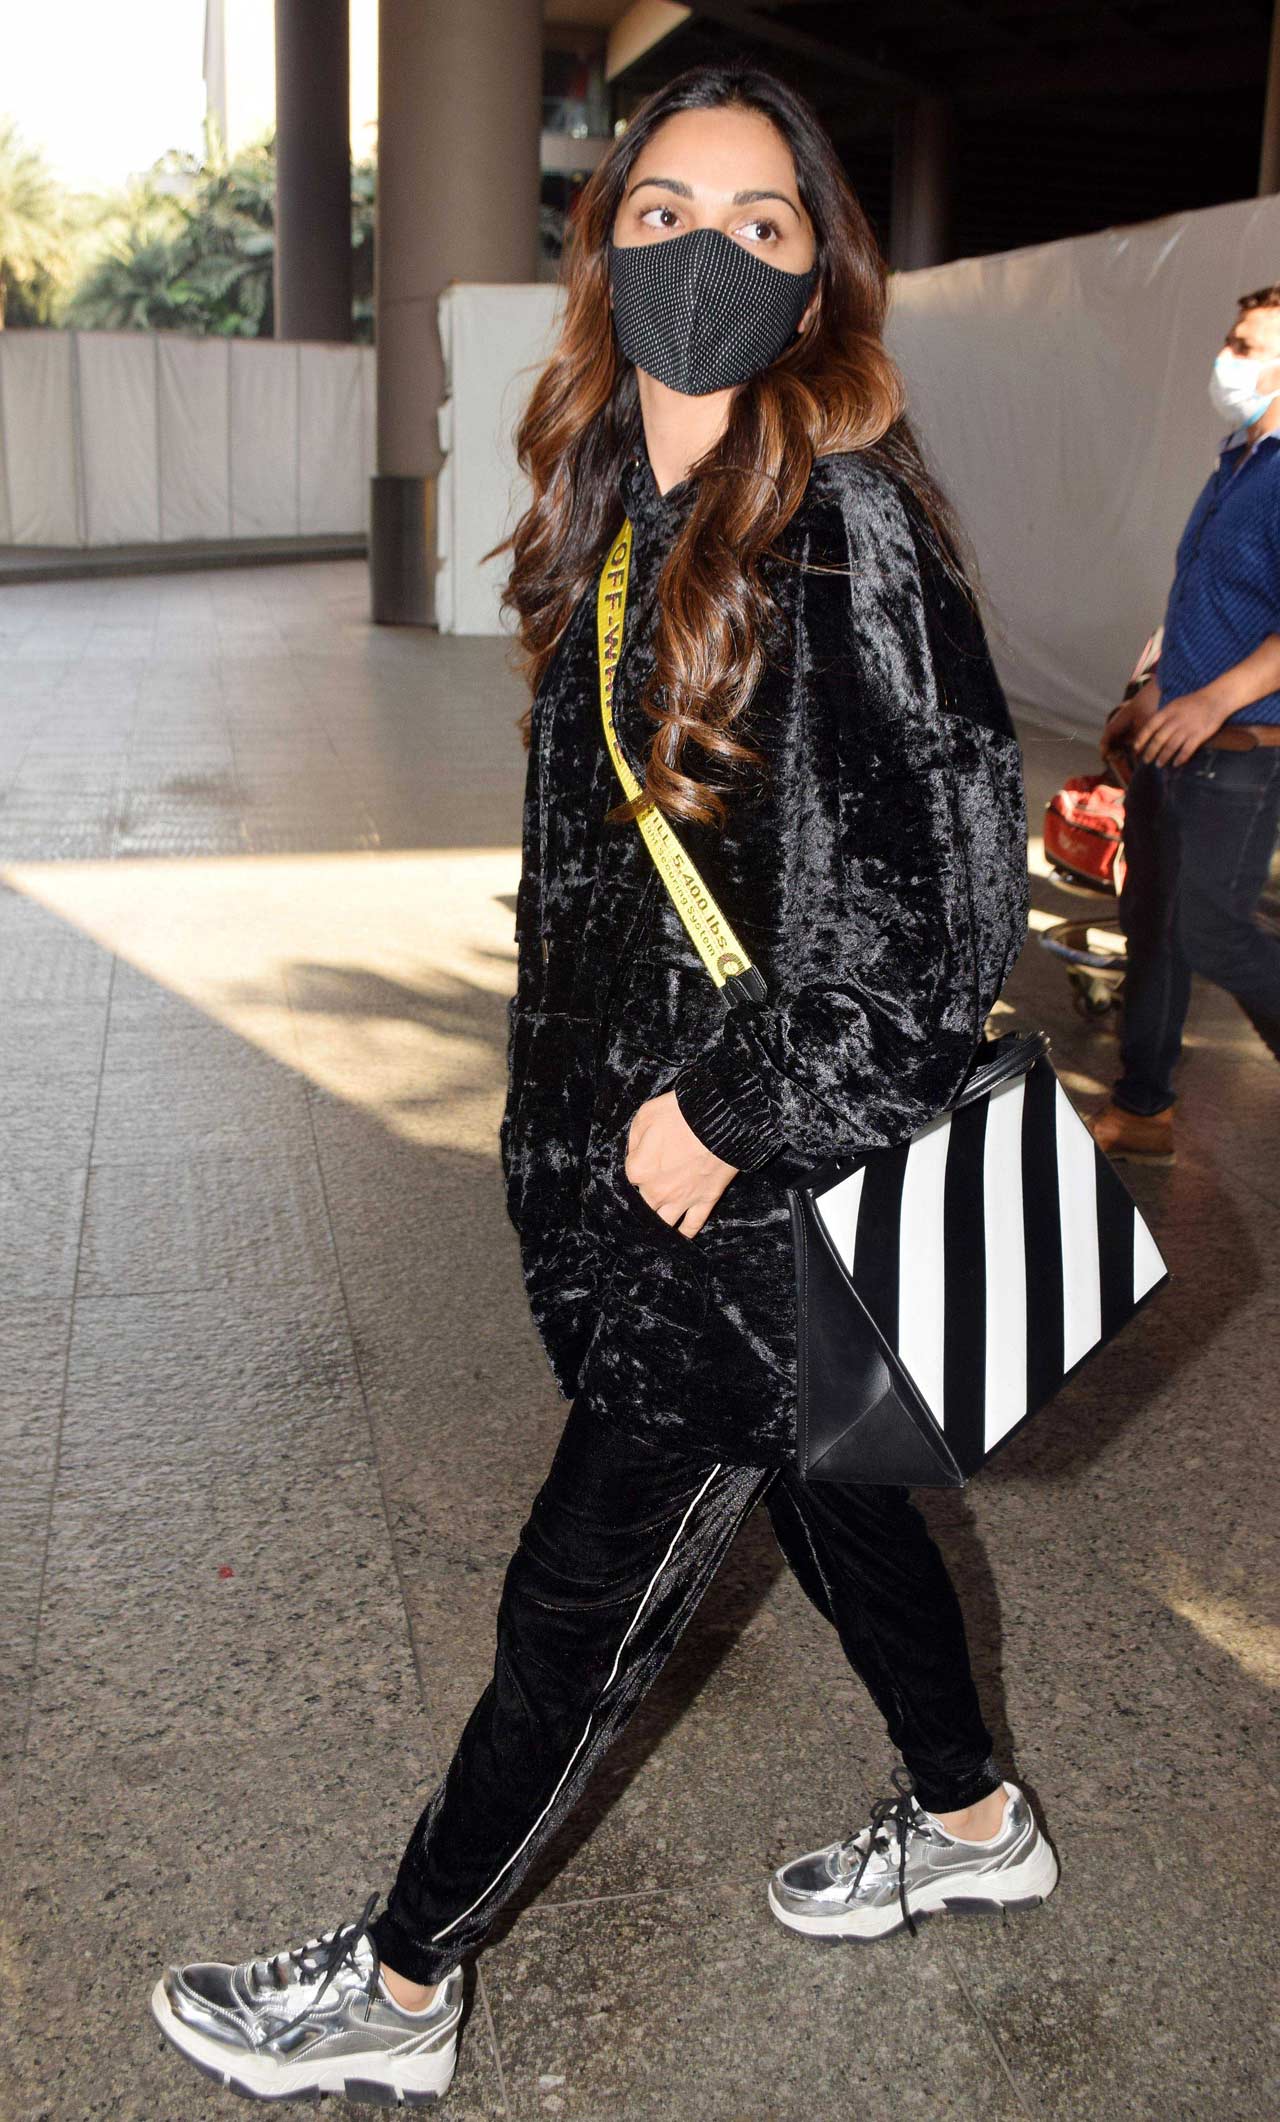 Kiara Advani opted for a velvet tracksuit when snapped at Mumbai airport. The actress will be next seen opposite Varun Dhawan in Jug Jugg Jeeyo, also starring Anil Kapoor and Neetu Kapoor, who will be playing a pivotal role in the film.